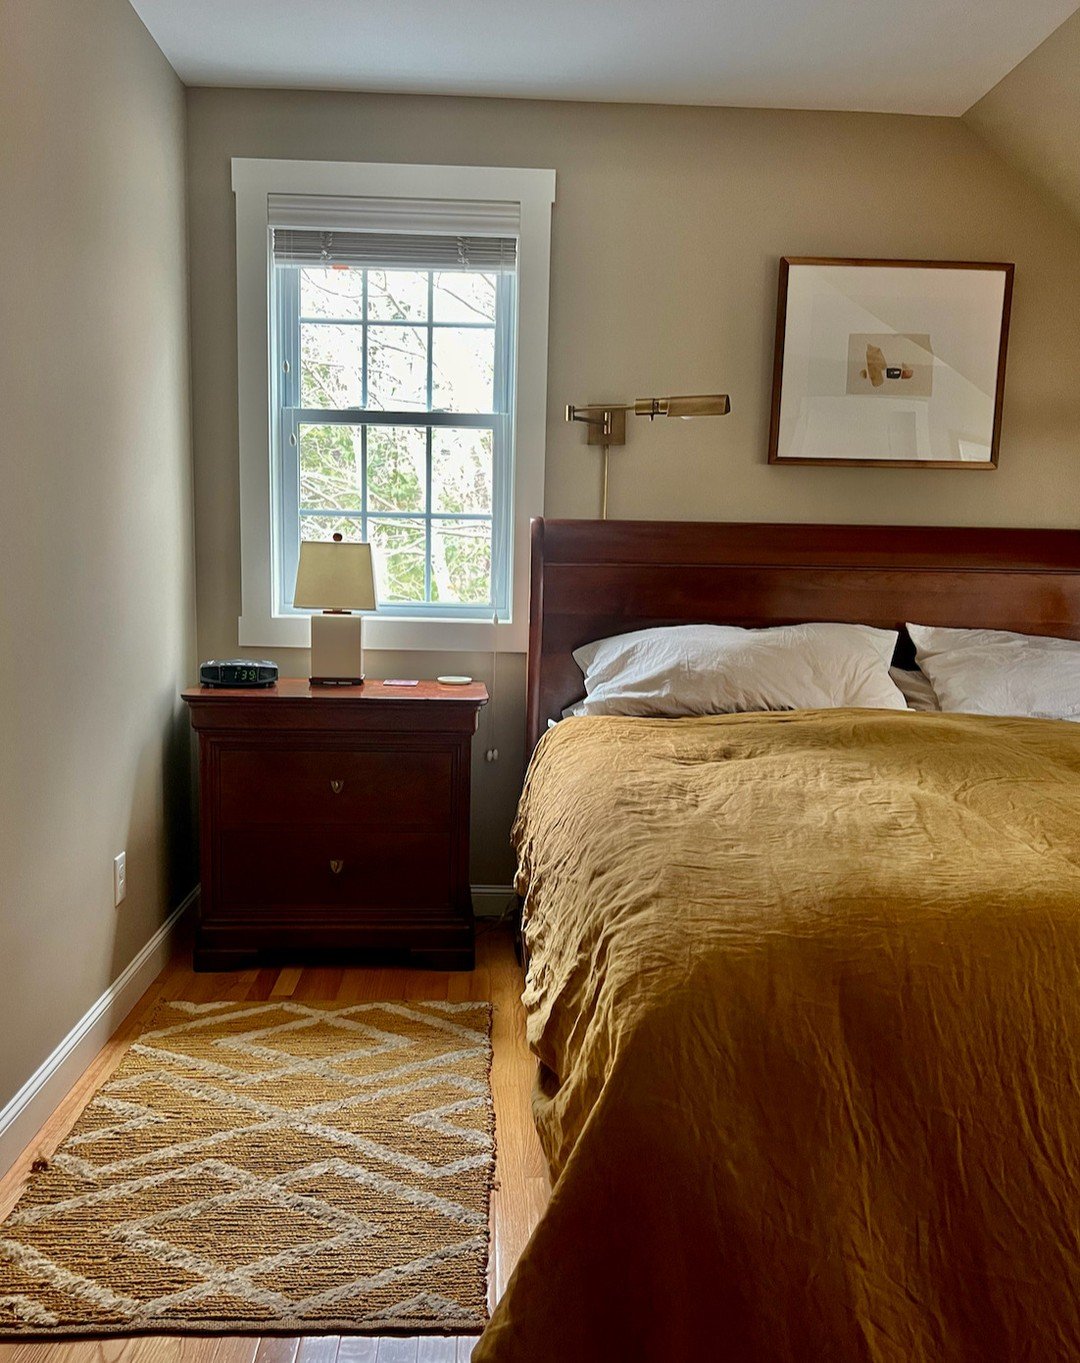 Warm wall tones for this Kittery, Maine home did wonders to bring the furnishings and decor together. The light was challenging, and these photos aren&rsquo;t the best, but I was pleased to see the results from a consult done in 2023. If you are stru